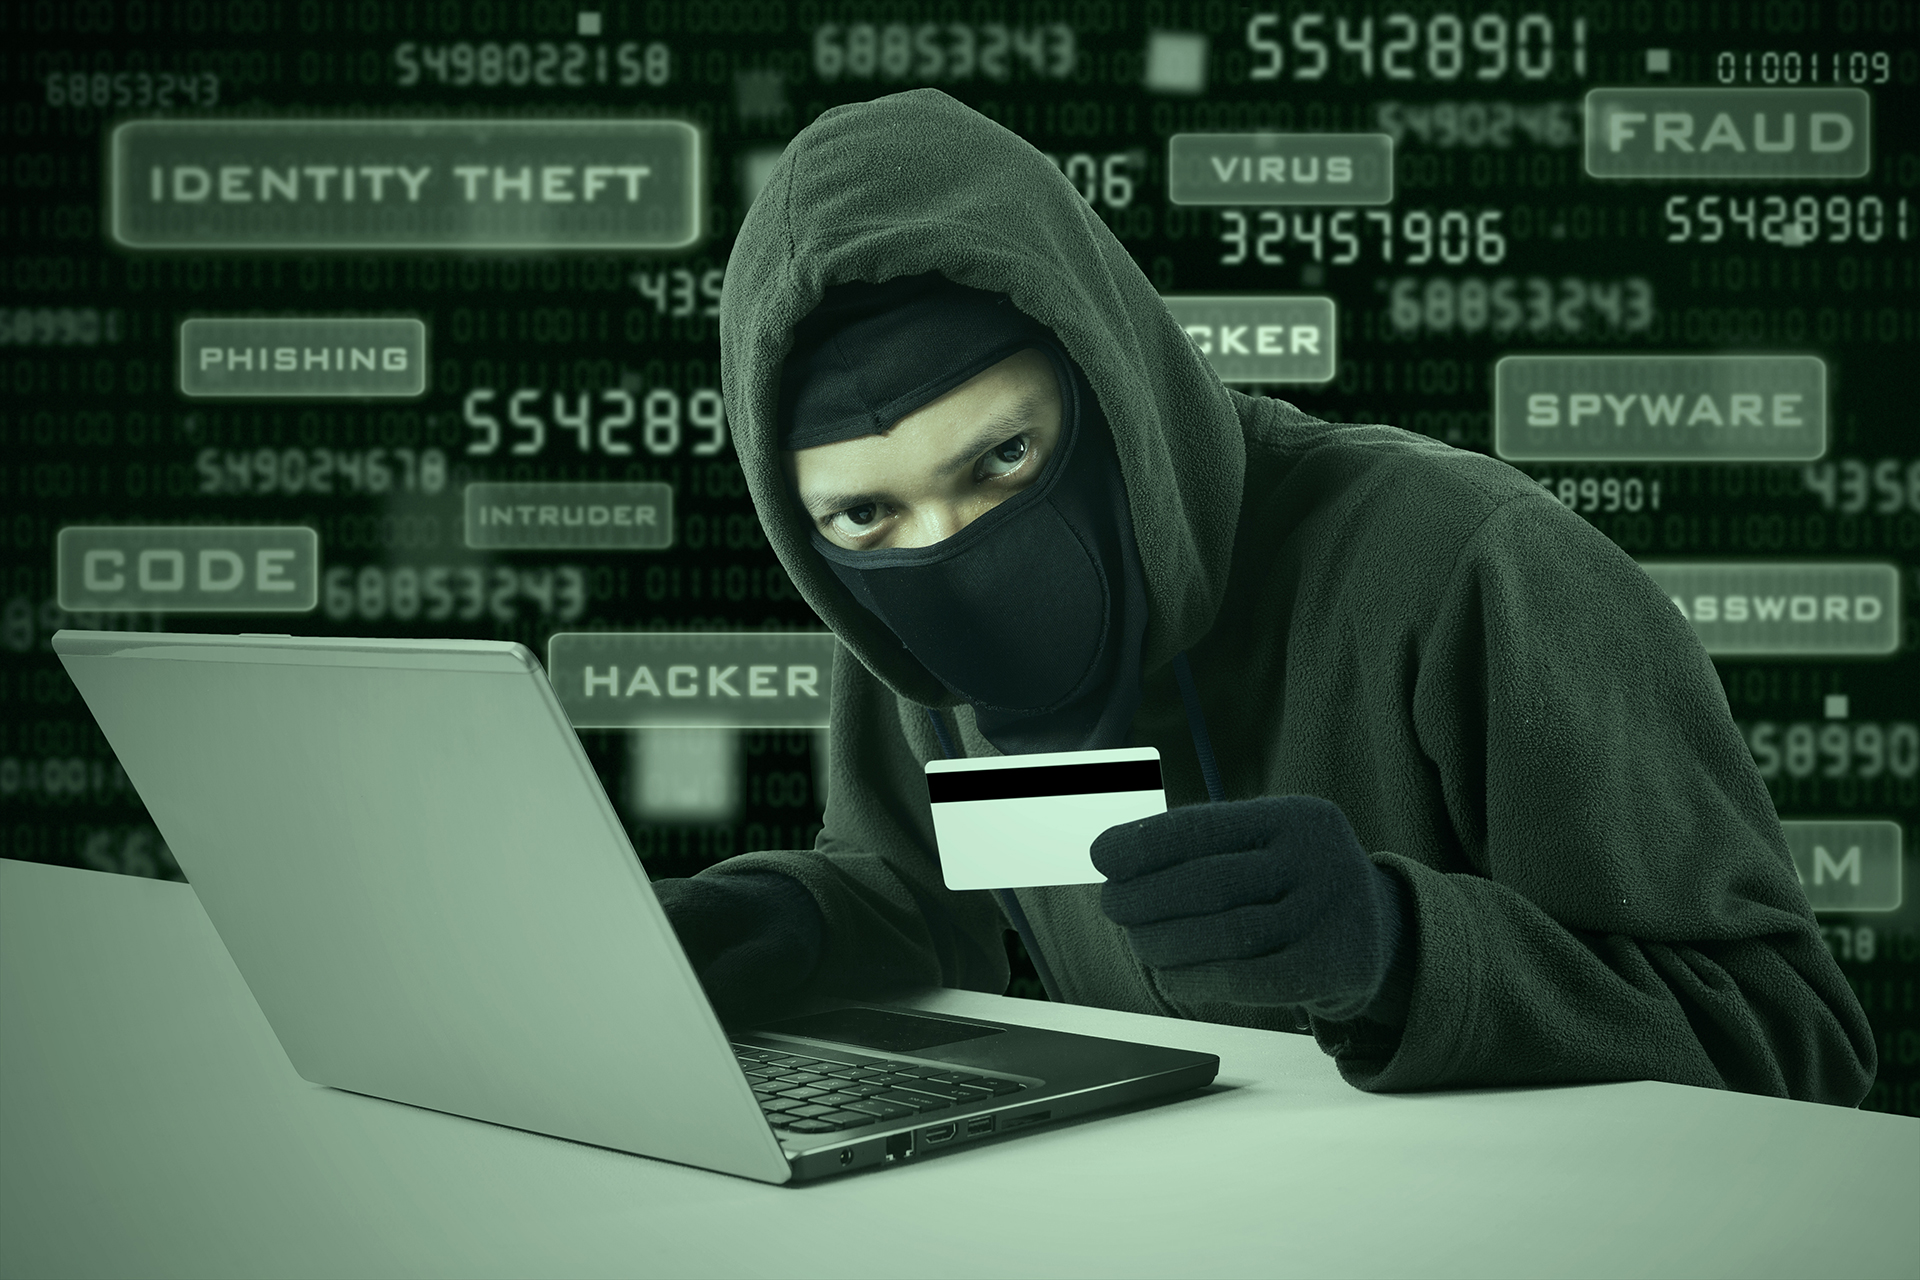 a person wearing a mask and holding a credit card in front of a laptop